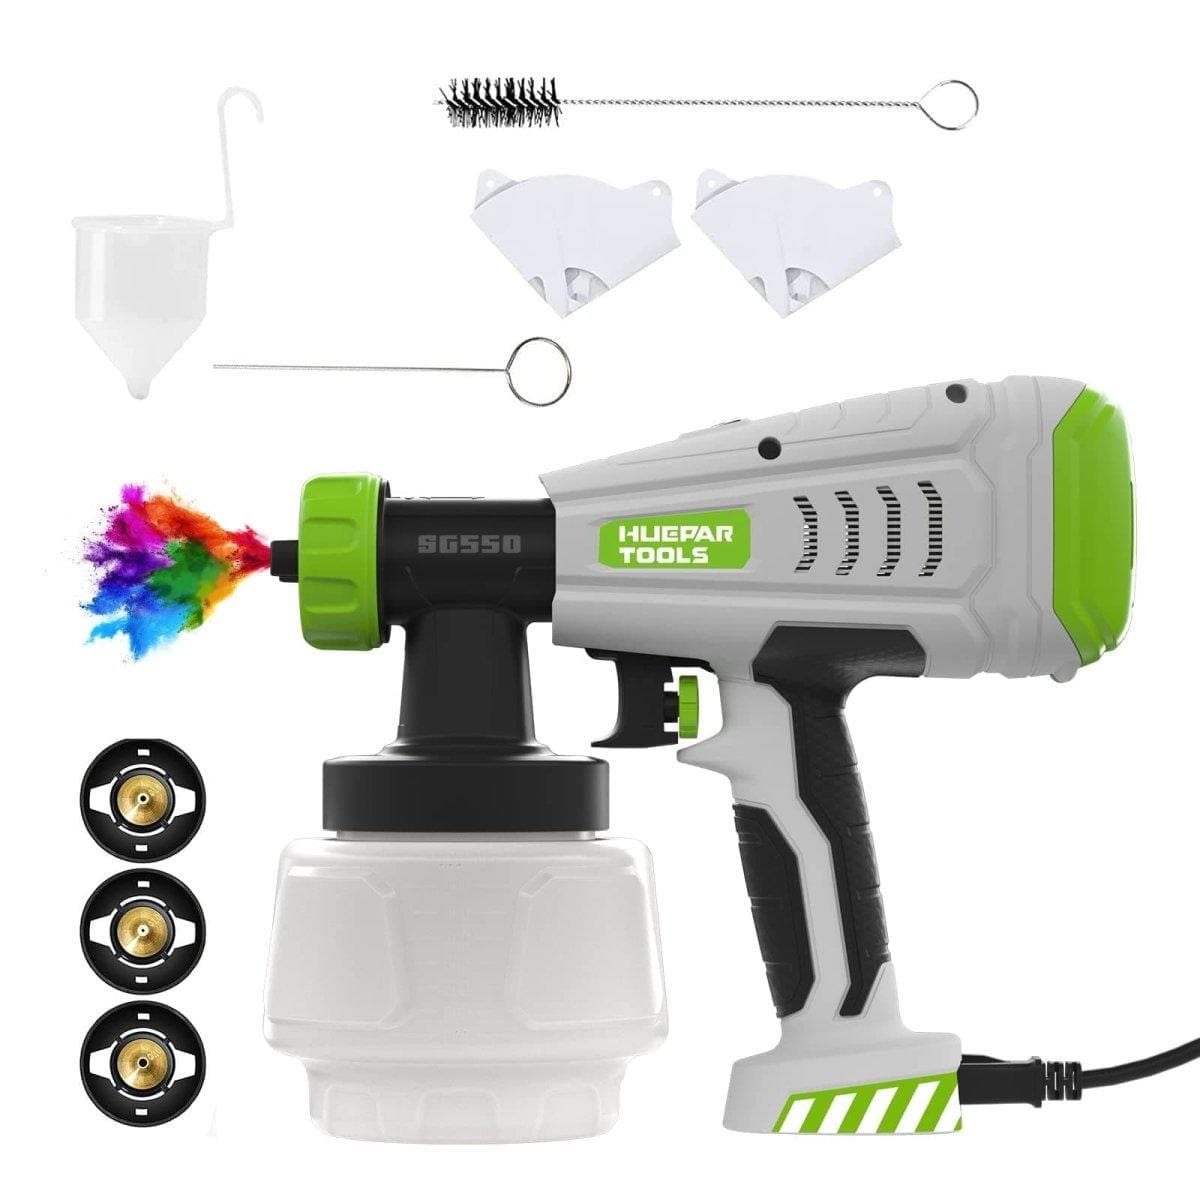 Huepar Tools SG550 HVLP electric paint sprayer with 1000ml capacity and 4 metal nozzles, 3 patterns for home interior and exterior walls, ceiling, cabinet, fence, and chair4